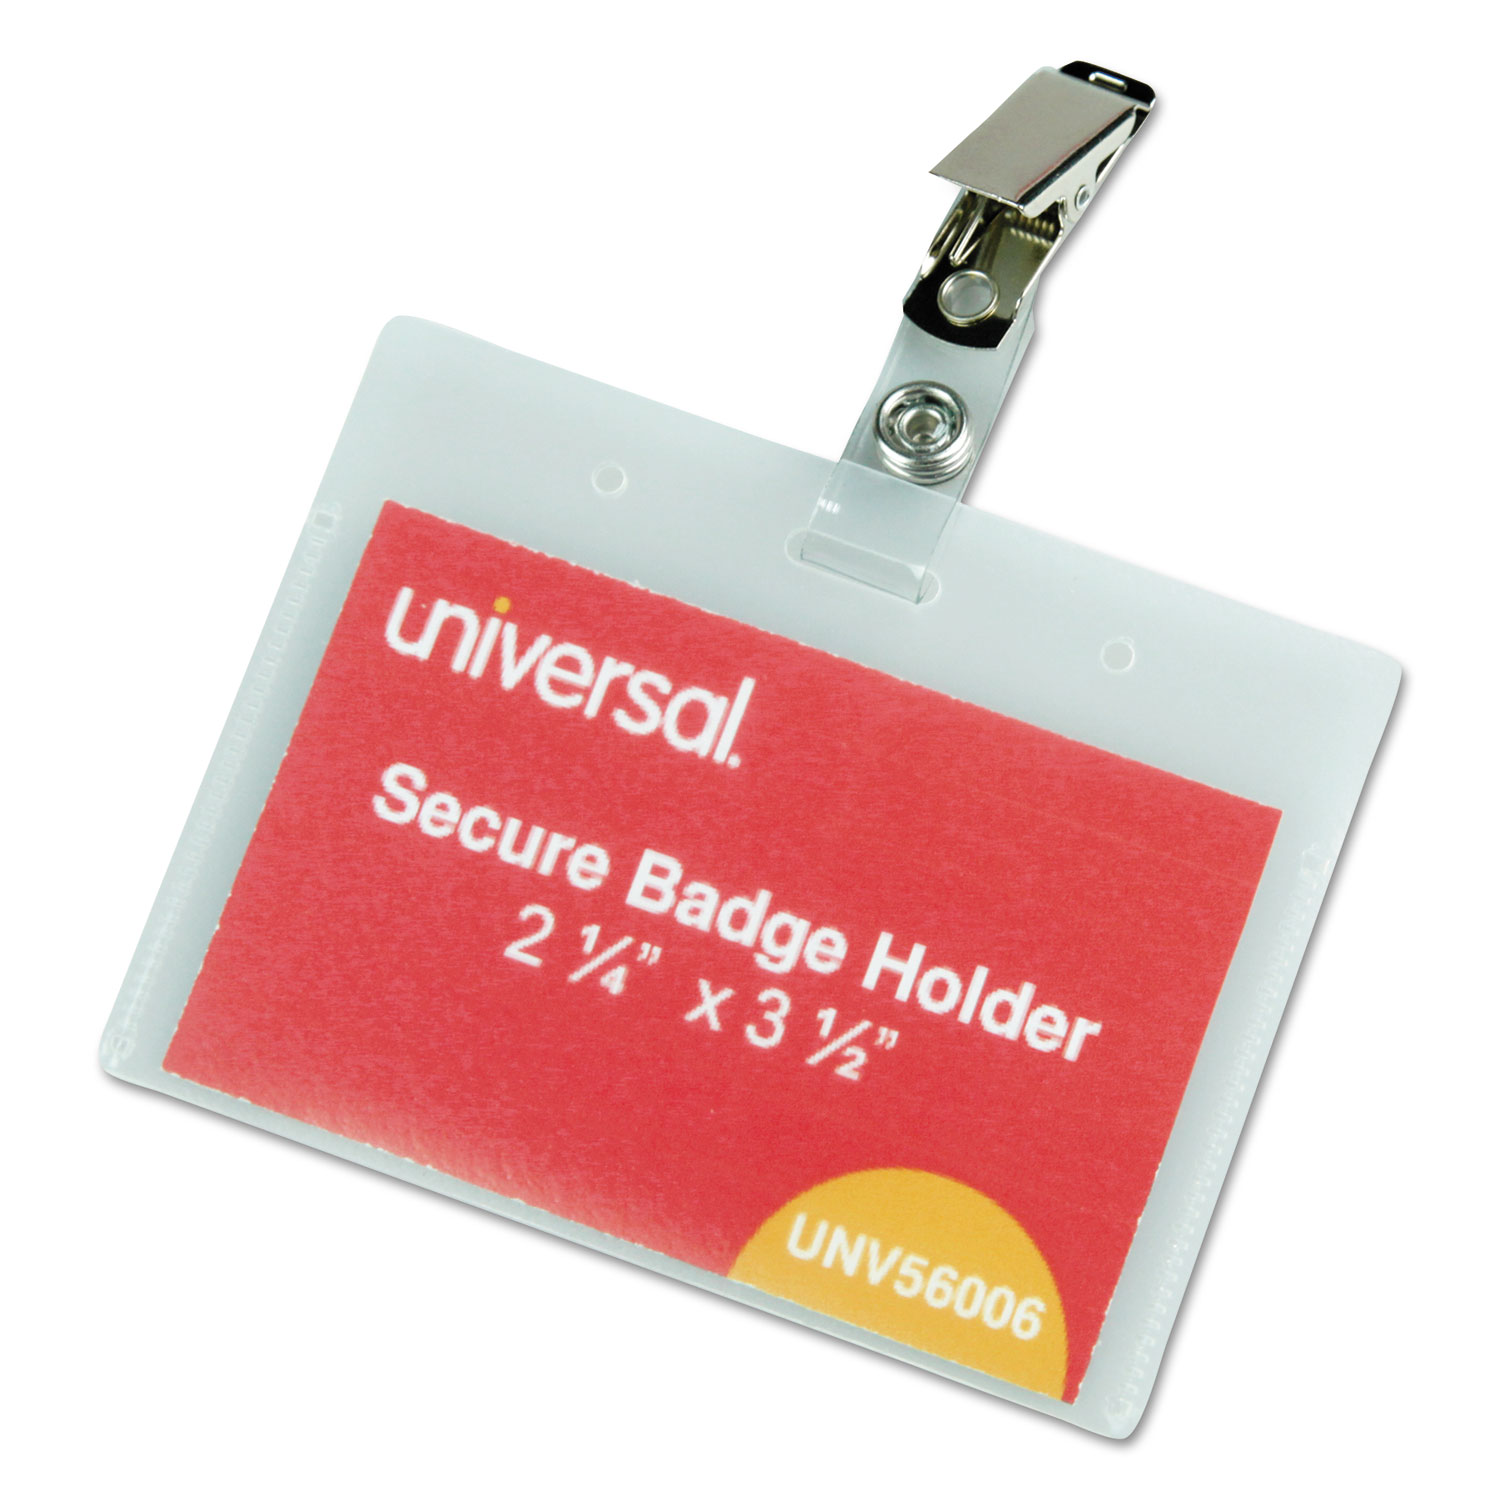  Universal UNV56006 Deluxe Clear Badge Holder w/Garment-Safe Clips, 2.25 x 3.5, White Insert, 50/Box (UNV56006) 